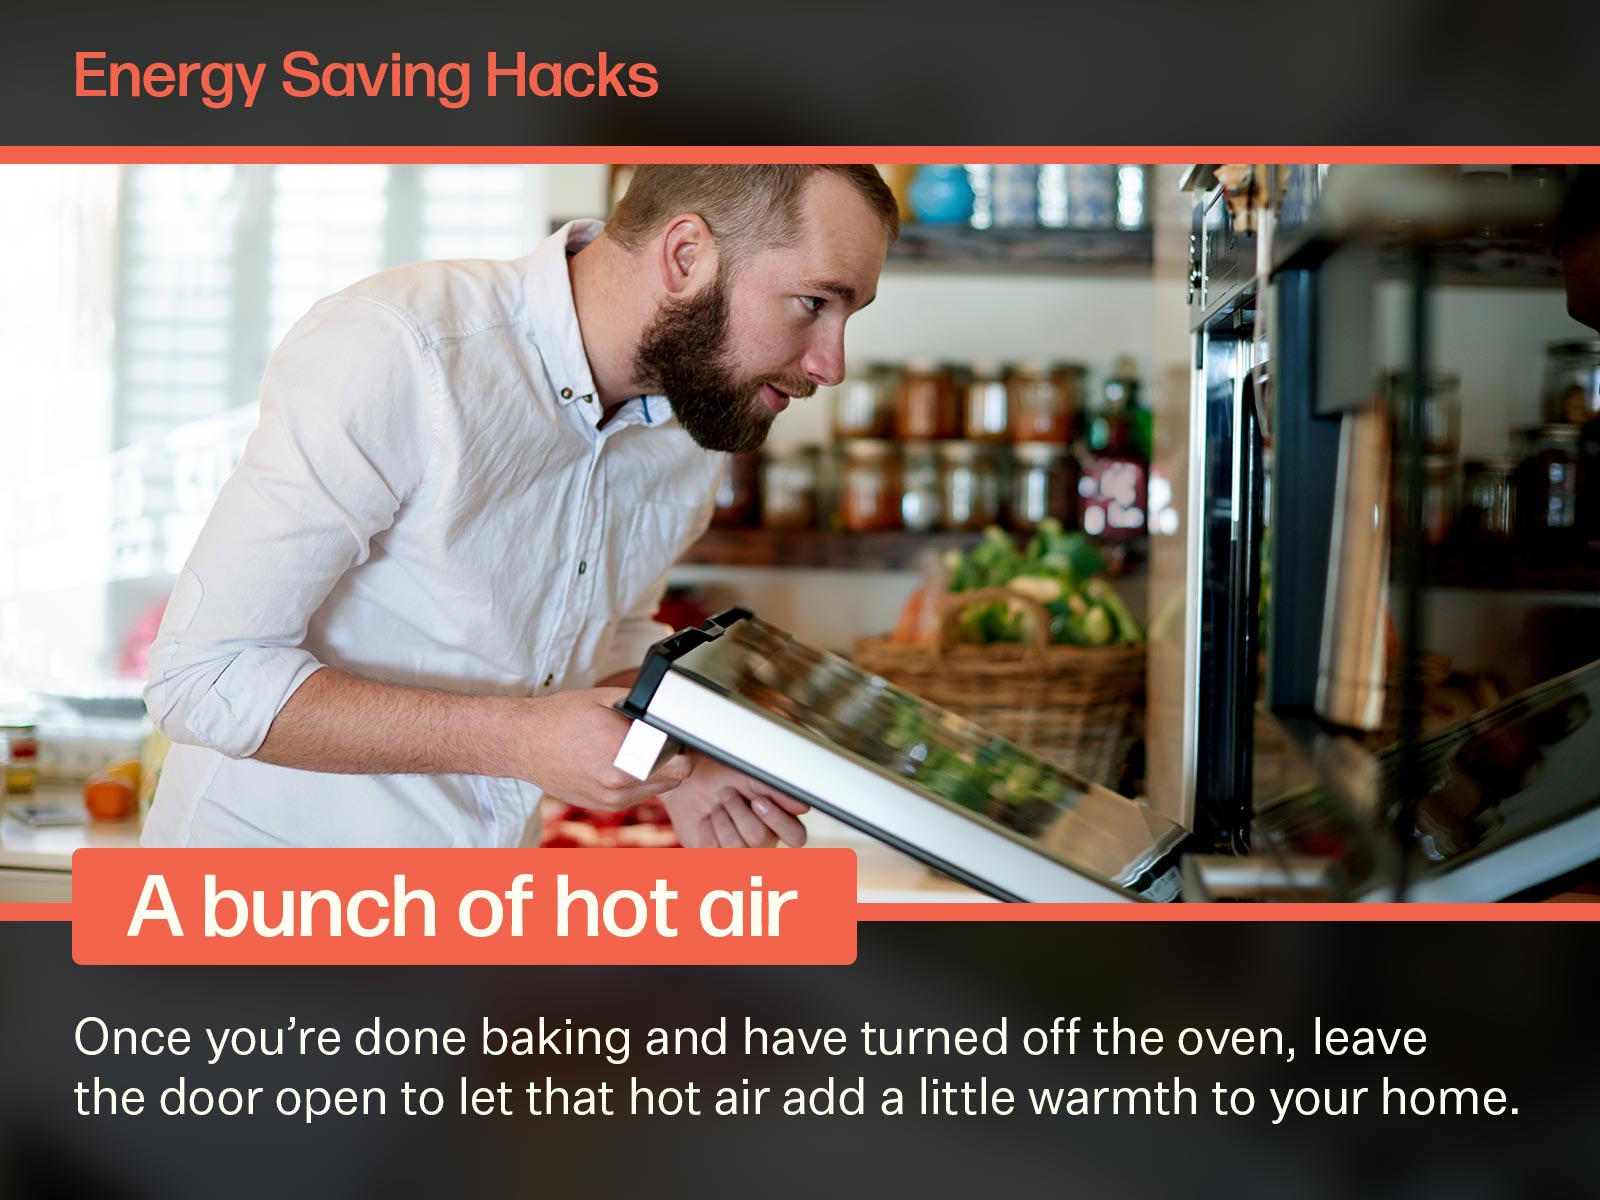 Image a young man using an energy efficiency hack to open an oven once he was done baking and let the extra heat warm the room. Text on image says: Energy Saving Hacks. A bunch of hot air. Once you're done baking and have turned off the oven, leave the door open to let that hot air add a little warmth to your home.